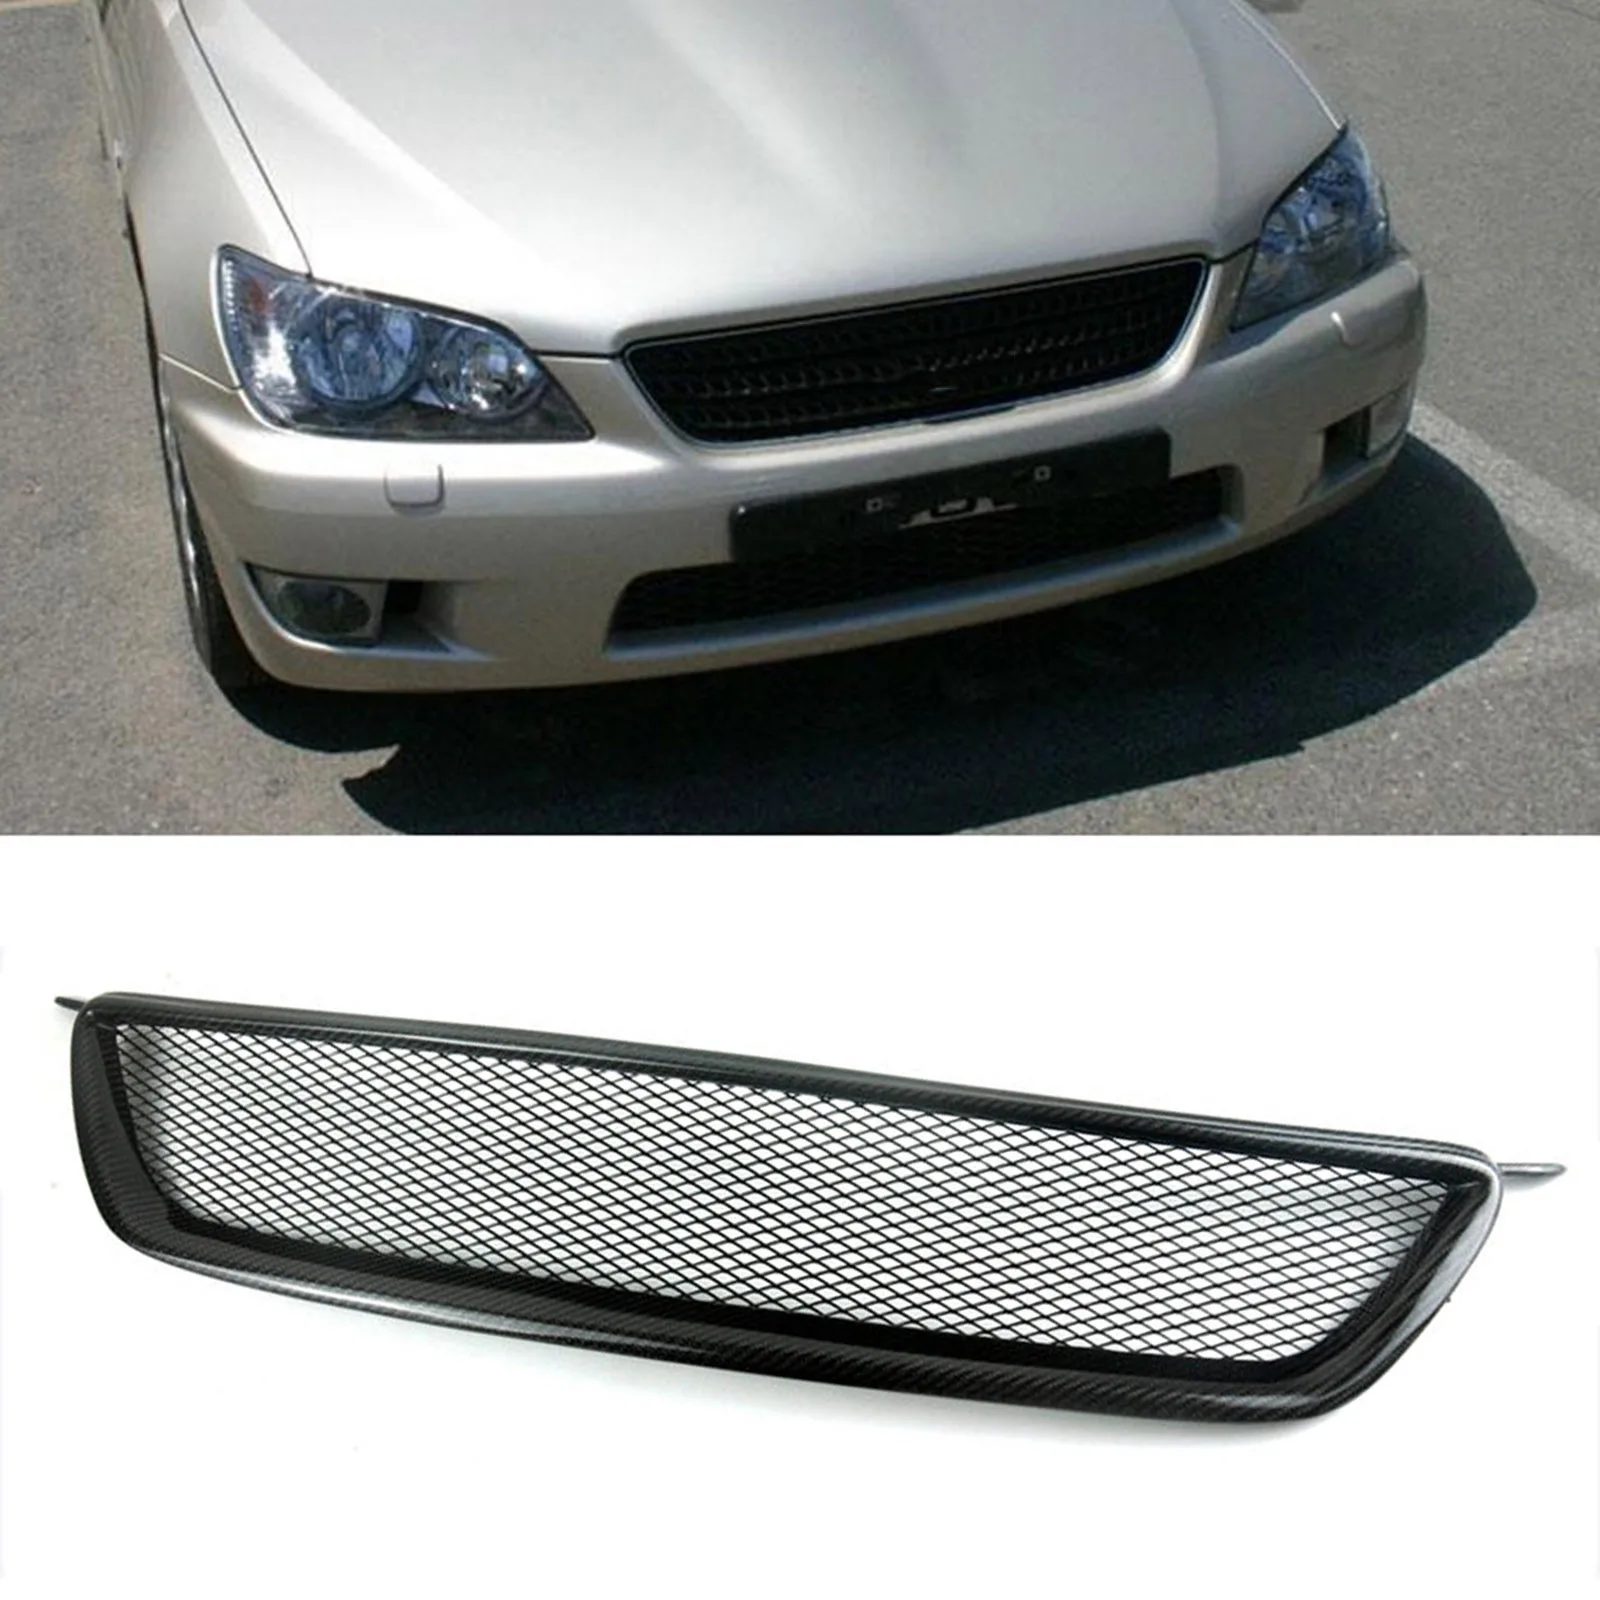 

Front Grille Grill For Lexus Is200 Is300 1998 1999 2000 2001 2002 2003 2004 Real Carbon Fiber Car Upper Bumper Hood Mesh Grid